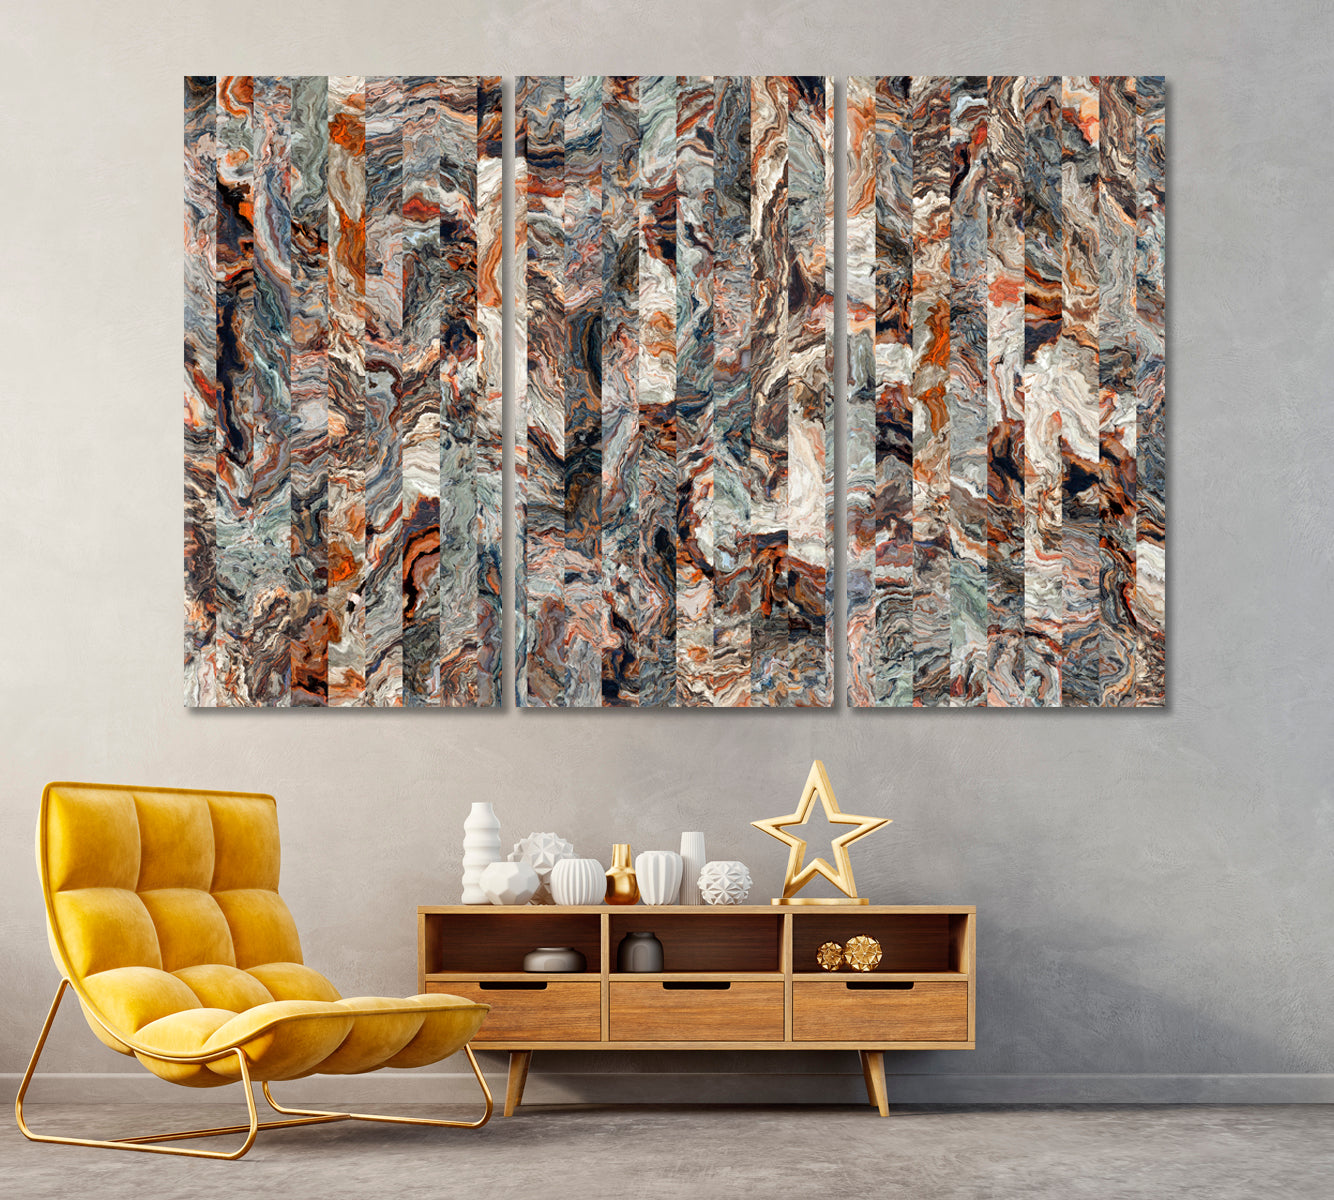 Curly Marble Canvas Print ArtLexy 3 Panels 36"x24" inches 